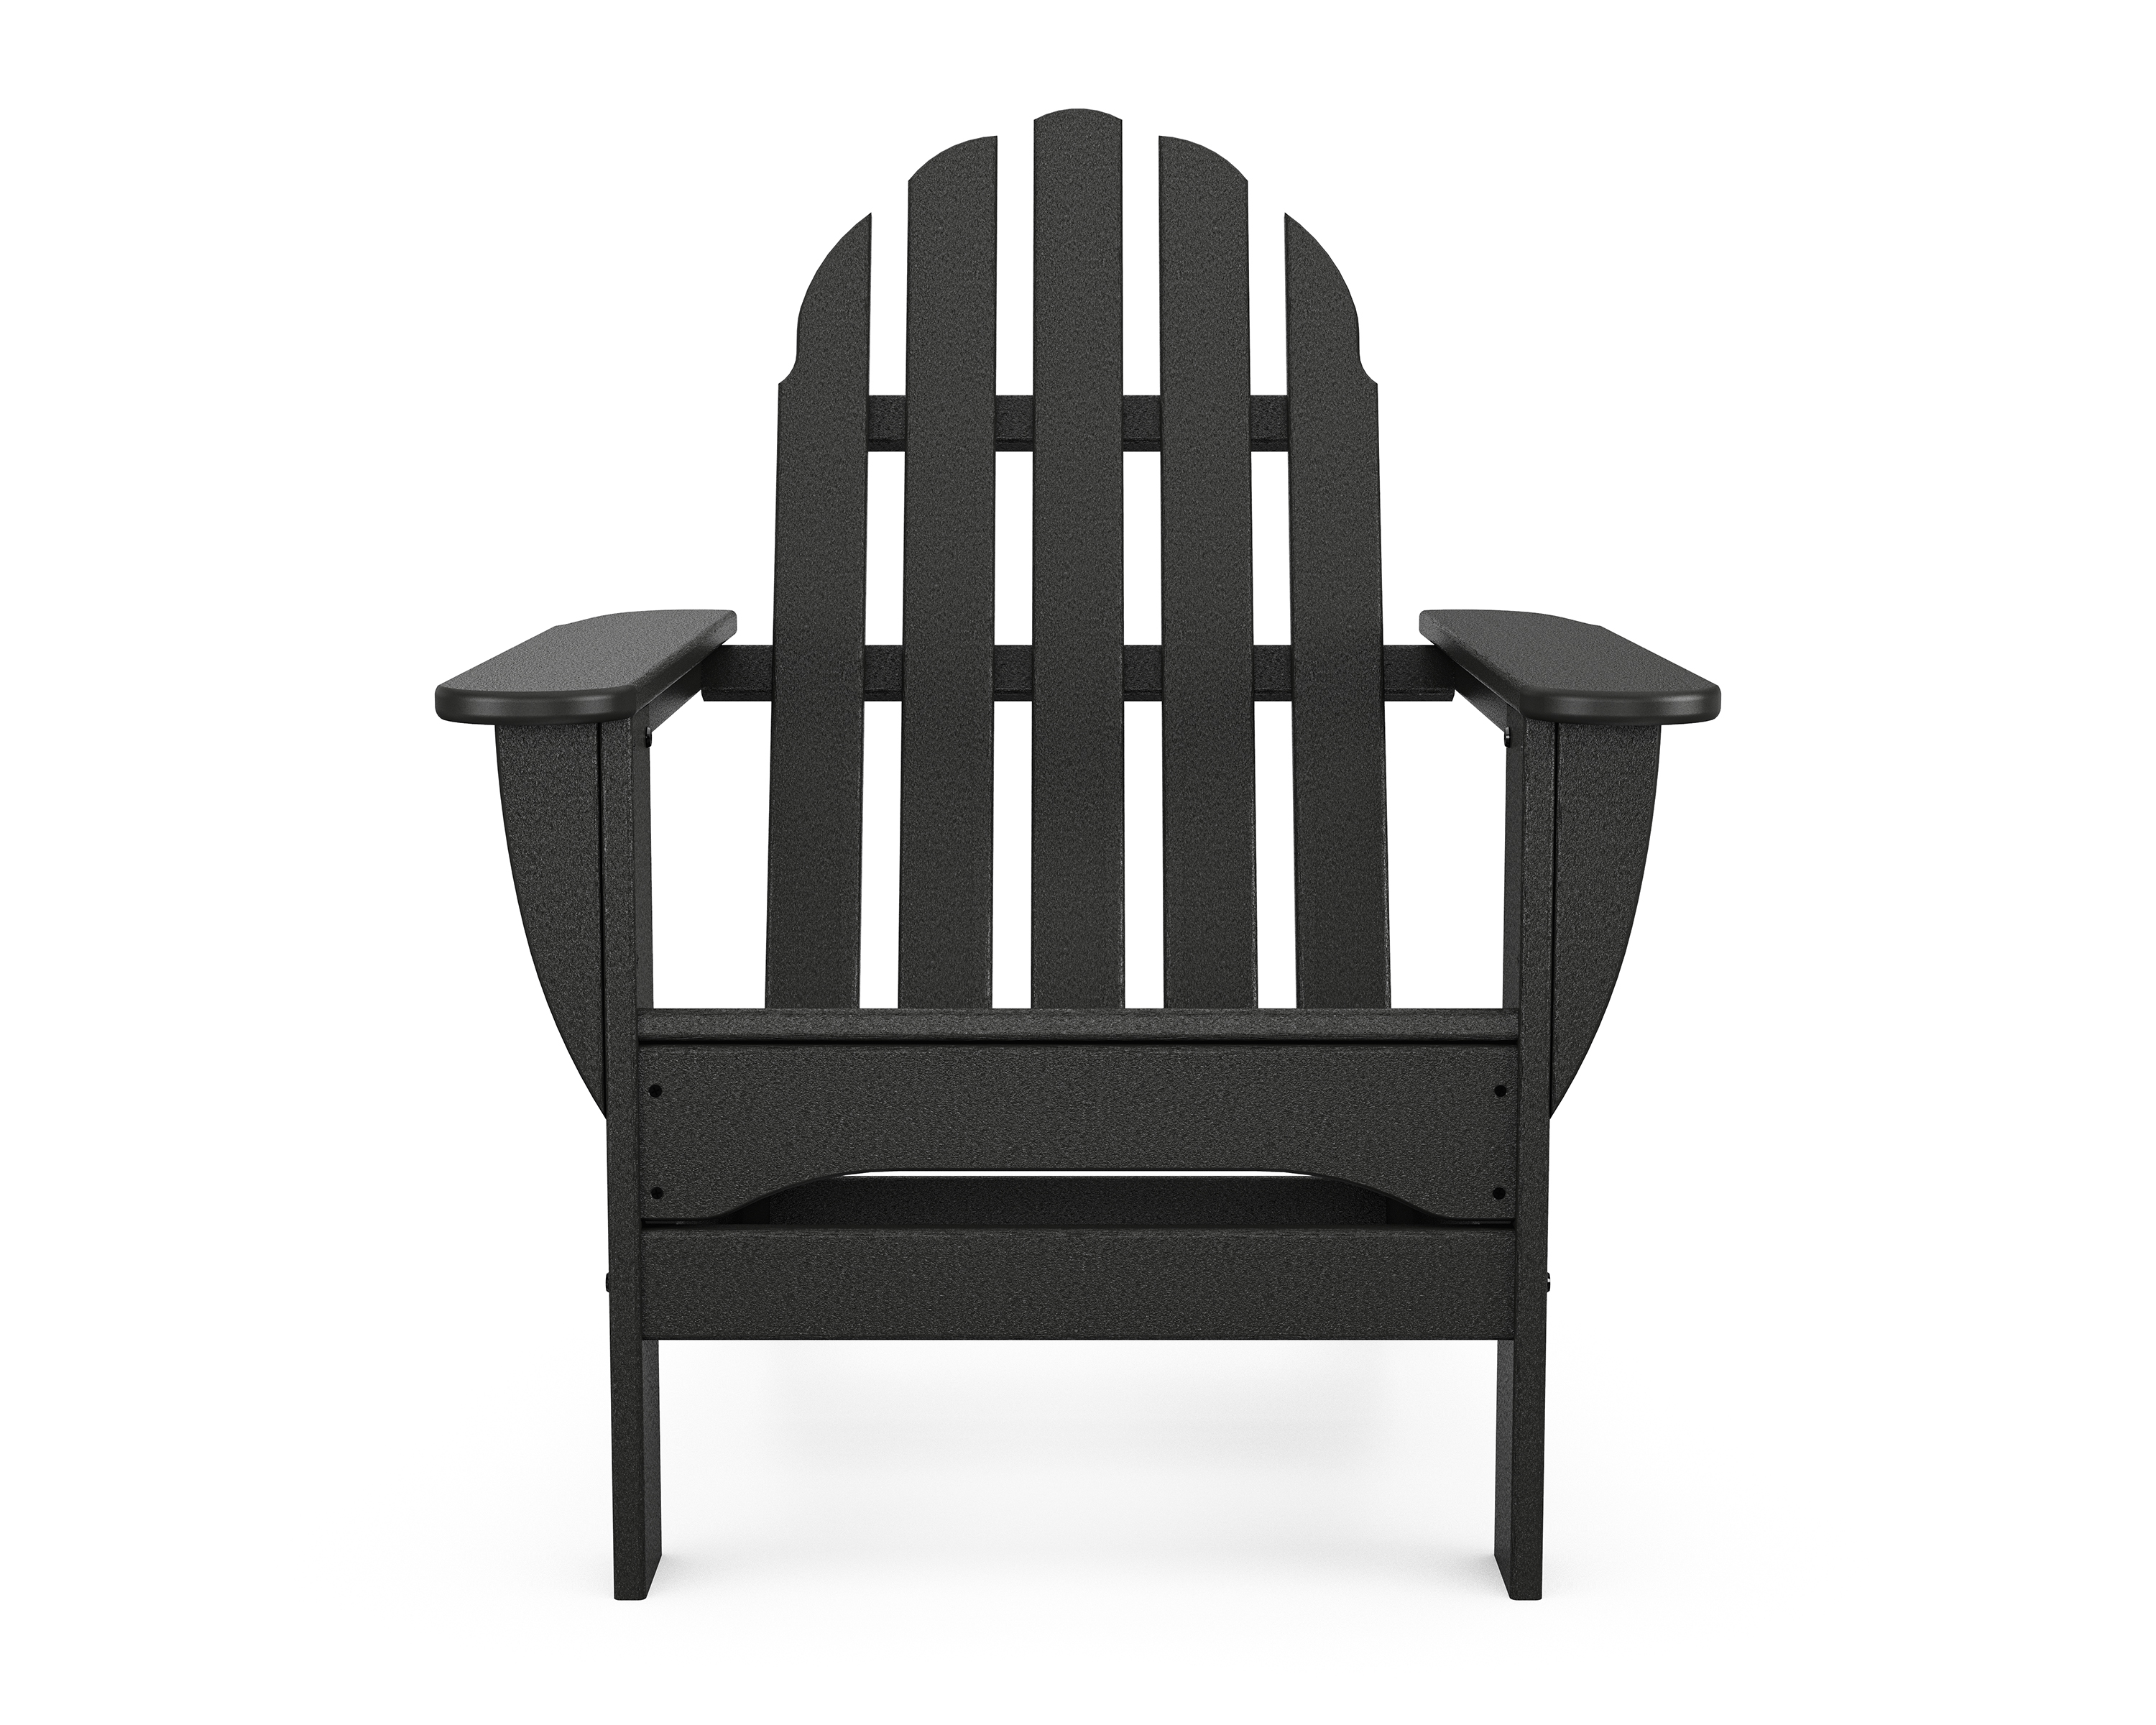 POLYWOOD Classic Adirondack 3-Piece Set with South Beach 18" Side Table in Black - image 5 of 5